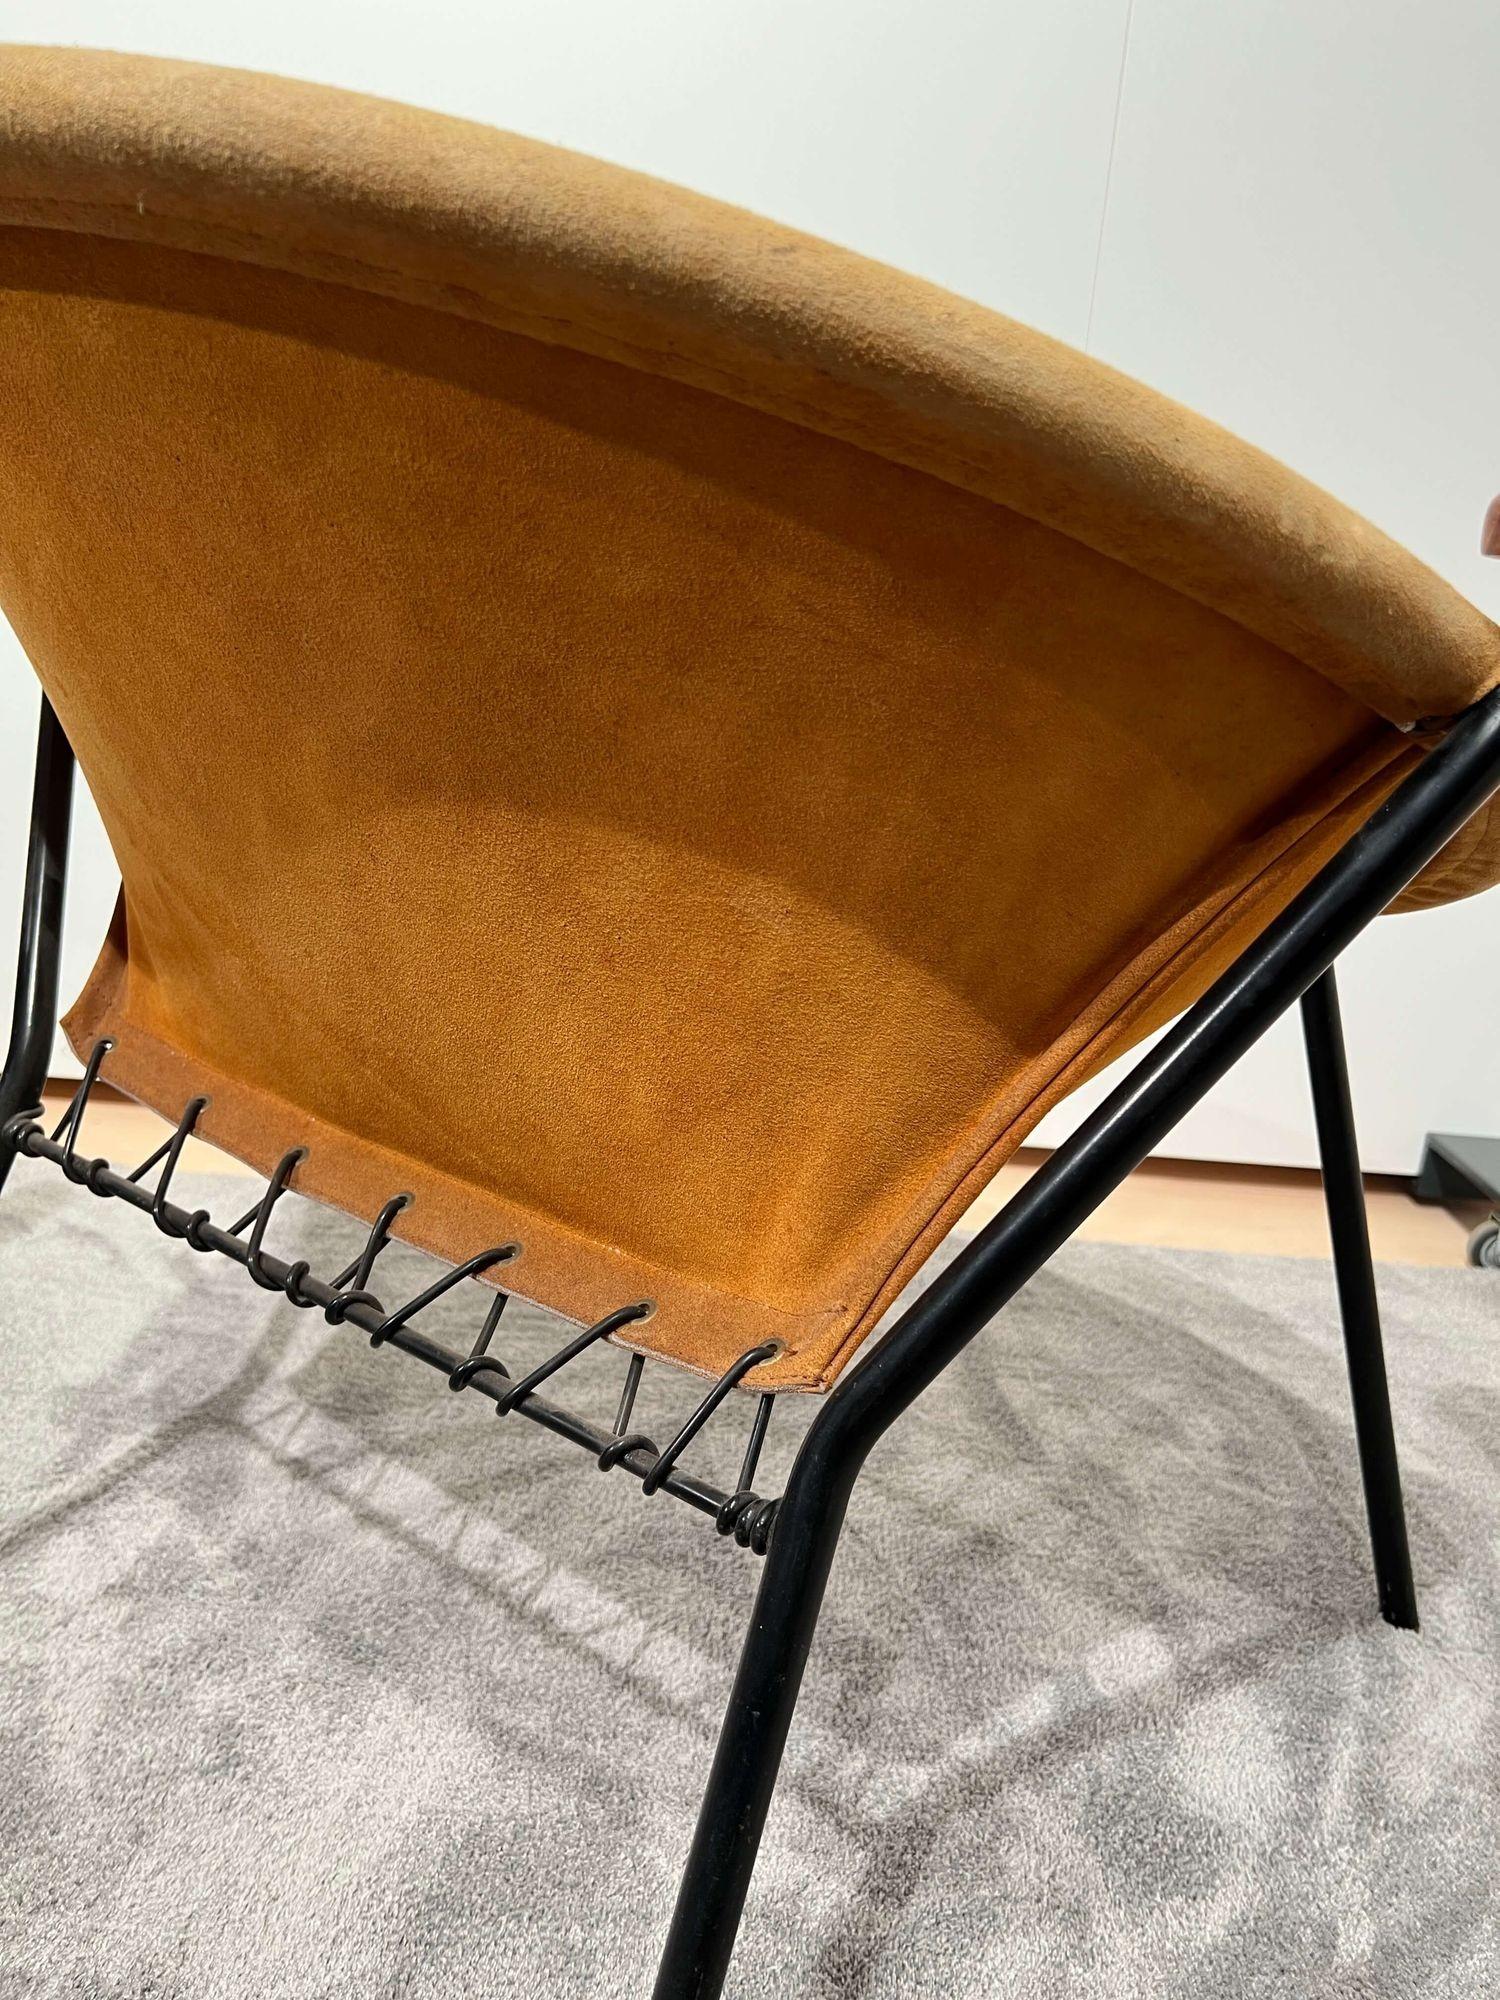 Metal Pair of ‚Balloon’ Lounge Chairs by Hans Olsen, Yellow Suede, Denmark, circa 1960 For Sale